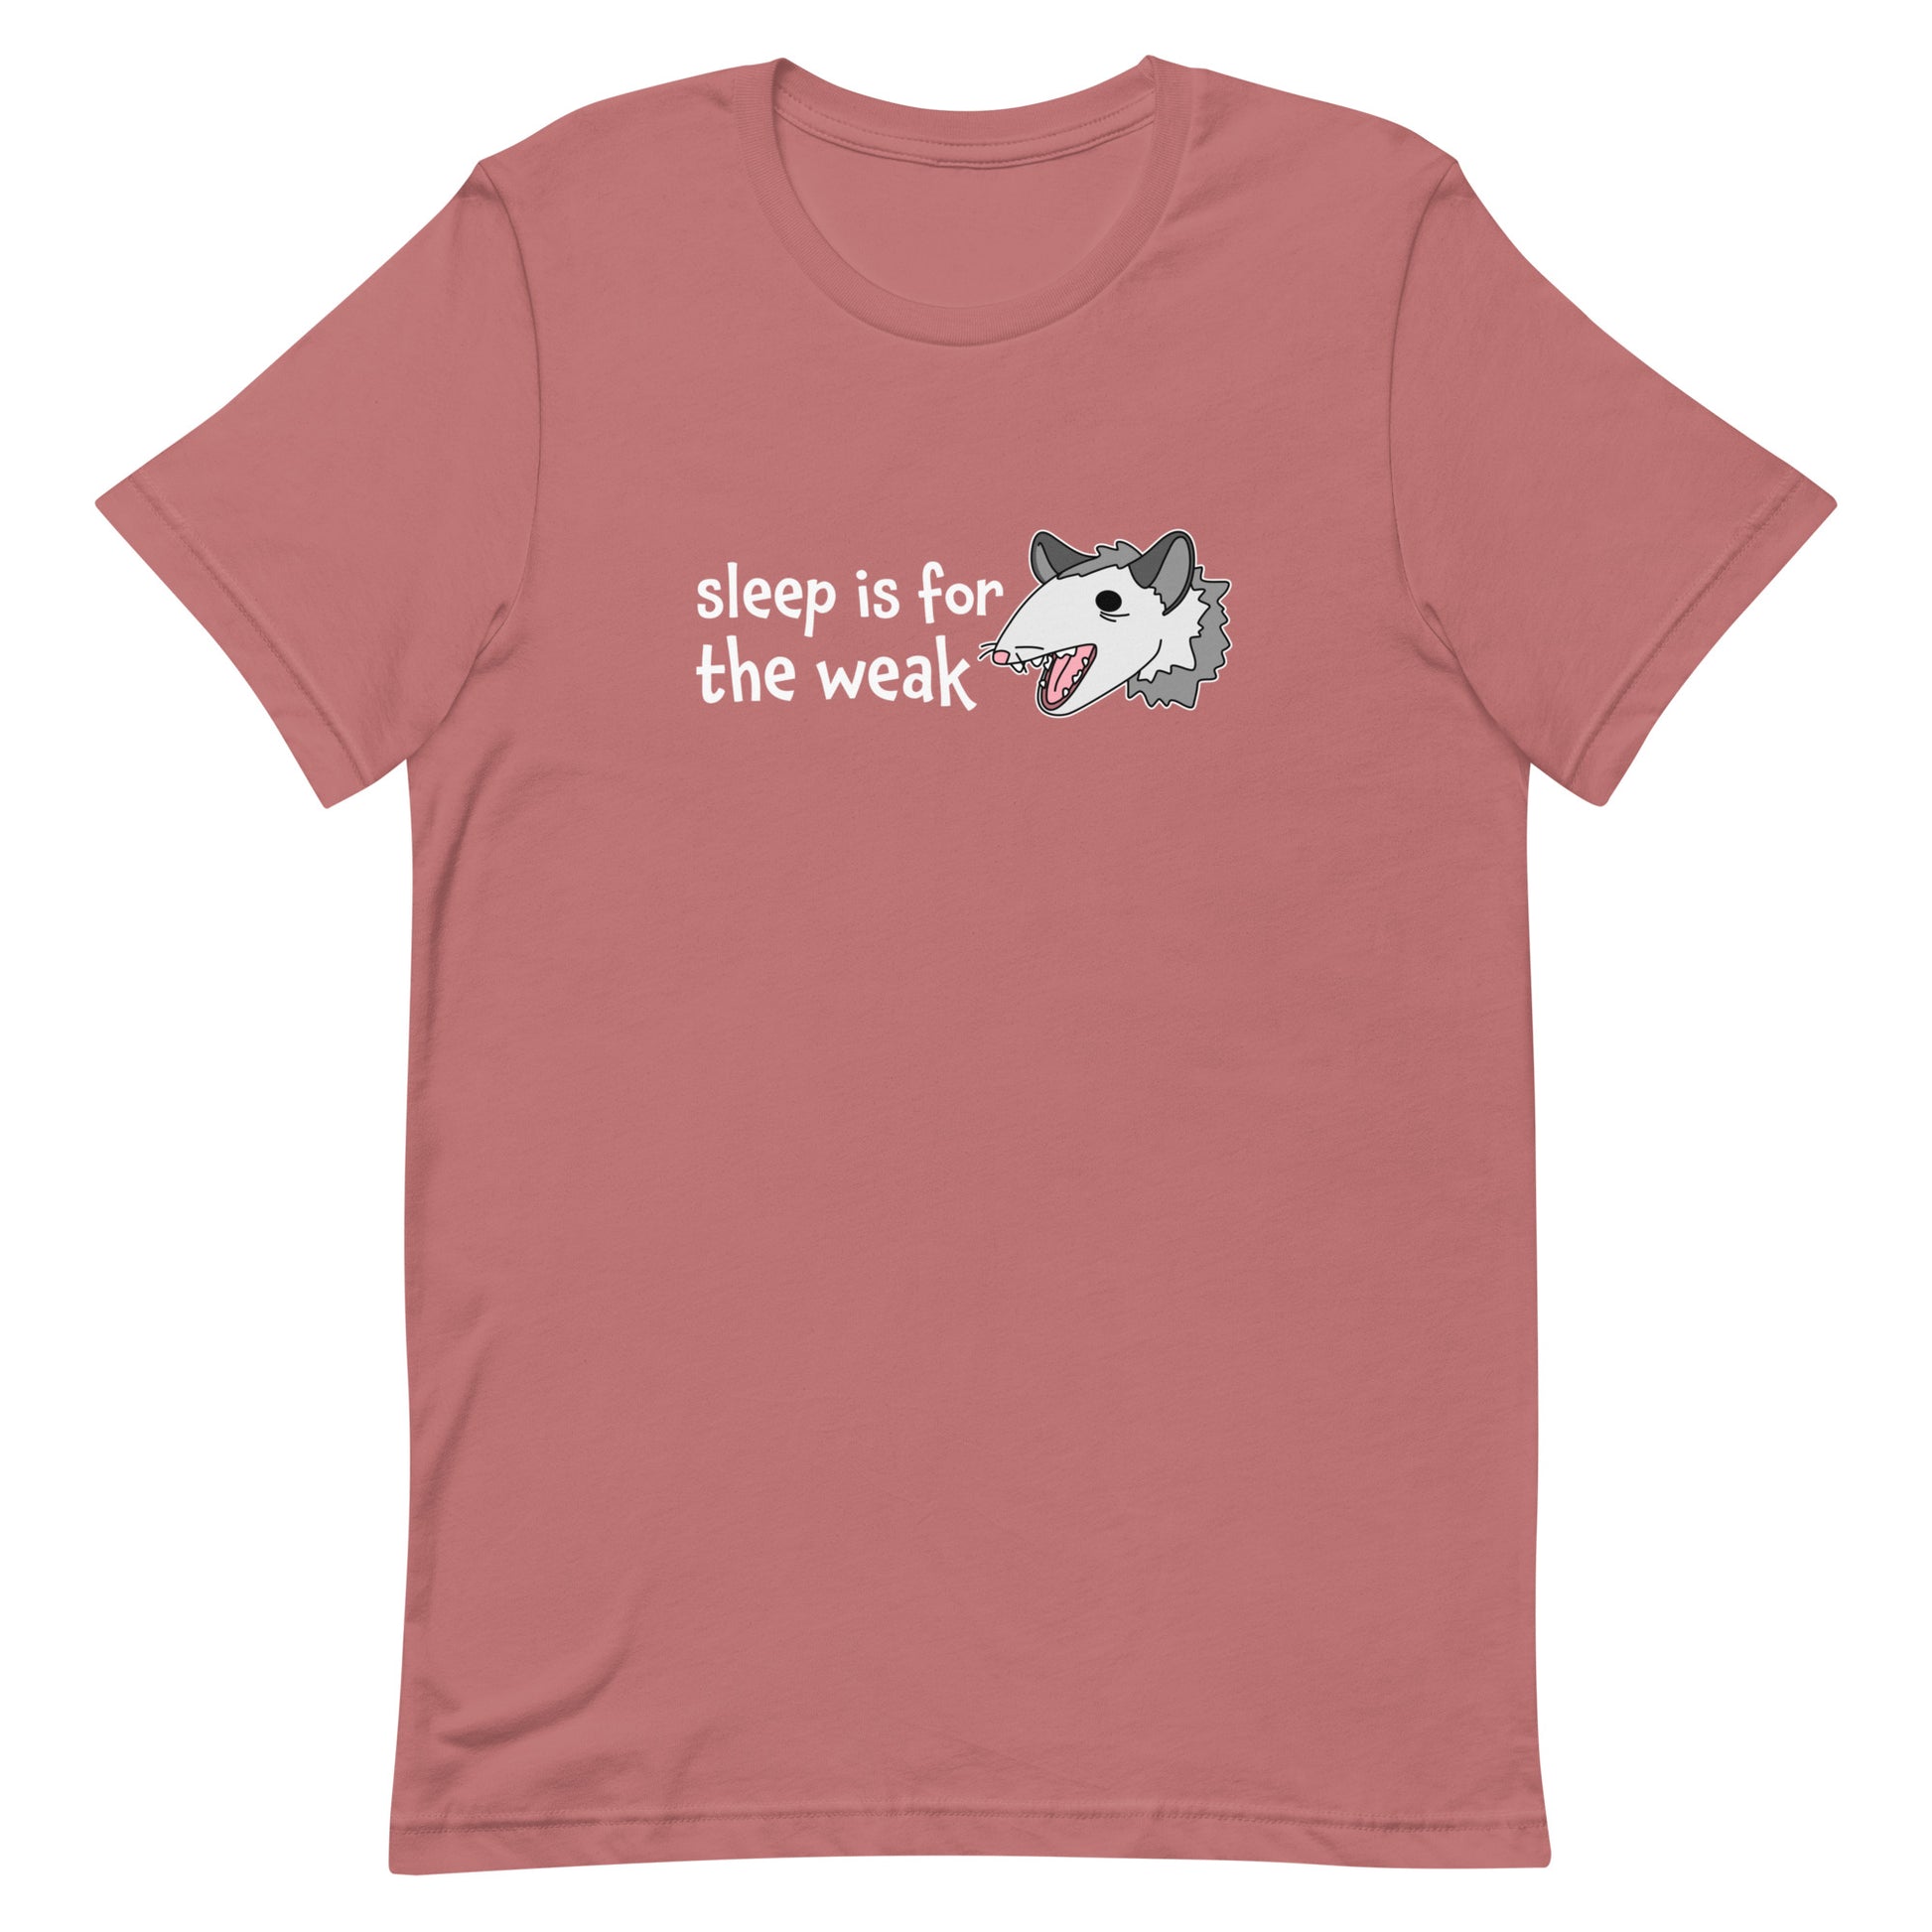 A dusky pink crewneck t-shirt featuring an illustration of an opossum with its mouth open, as if it was yelling. Text alongside the opossum reads "sleep is for the weak"